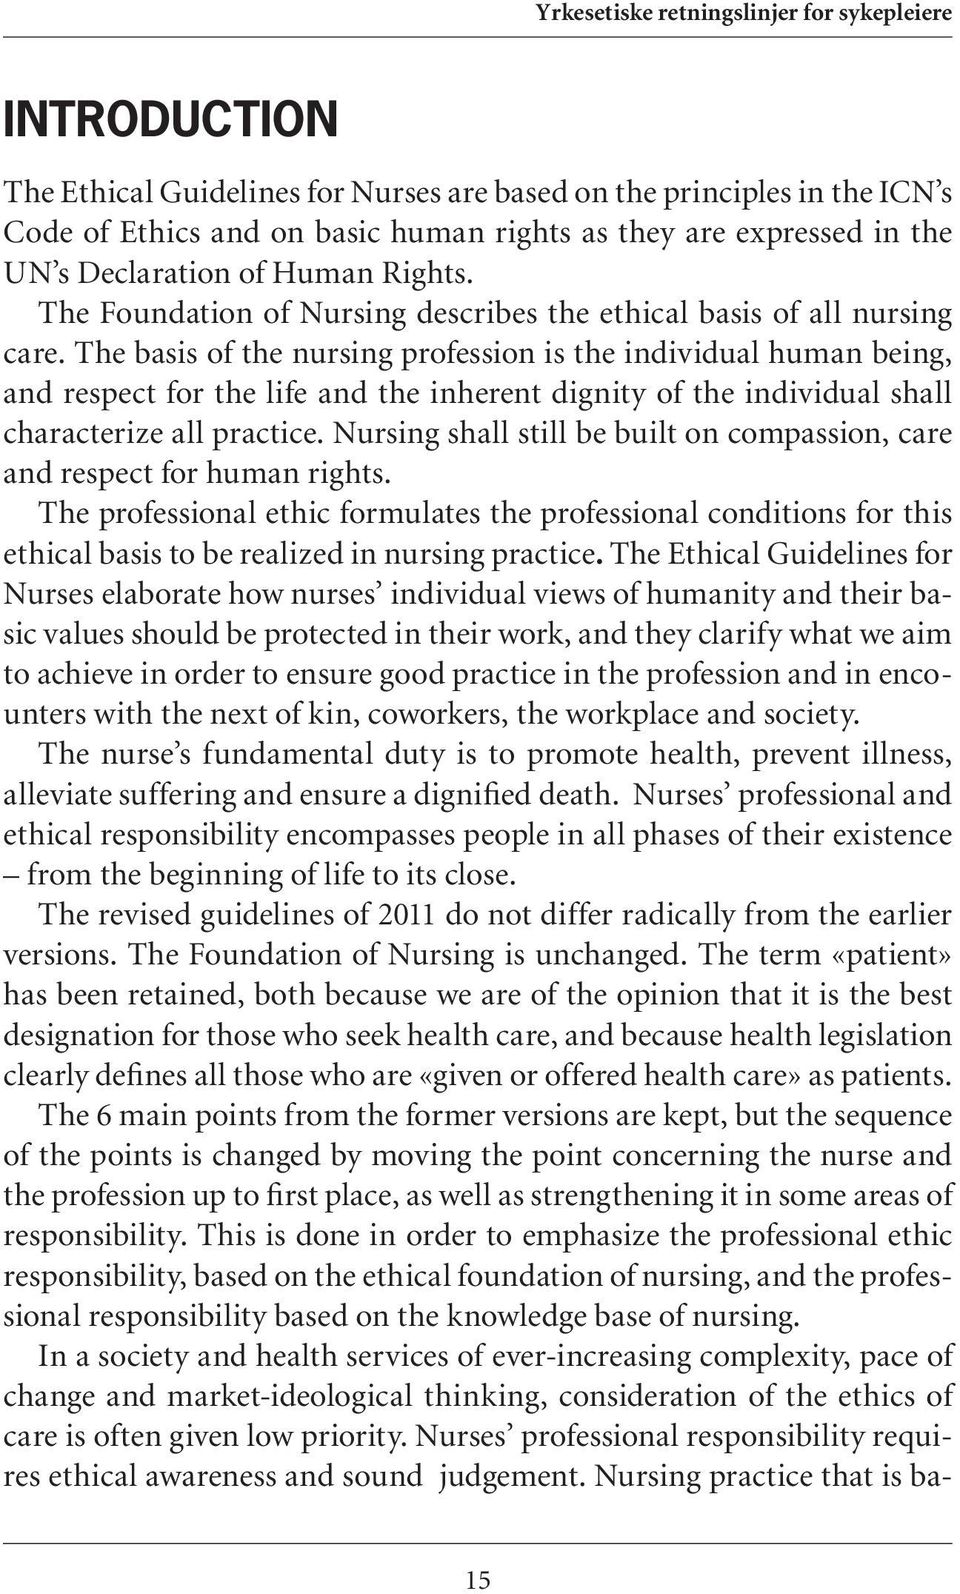 The basis of the nursing profession is the individual human being, and respect for the life and the inherent dignity of the individual shall characterize all practice.